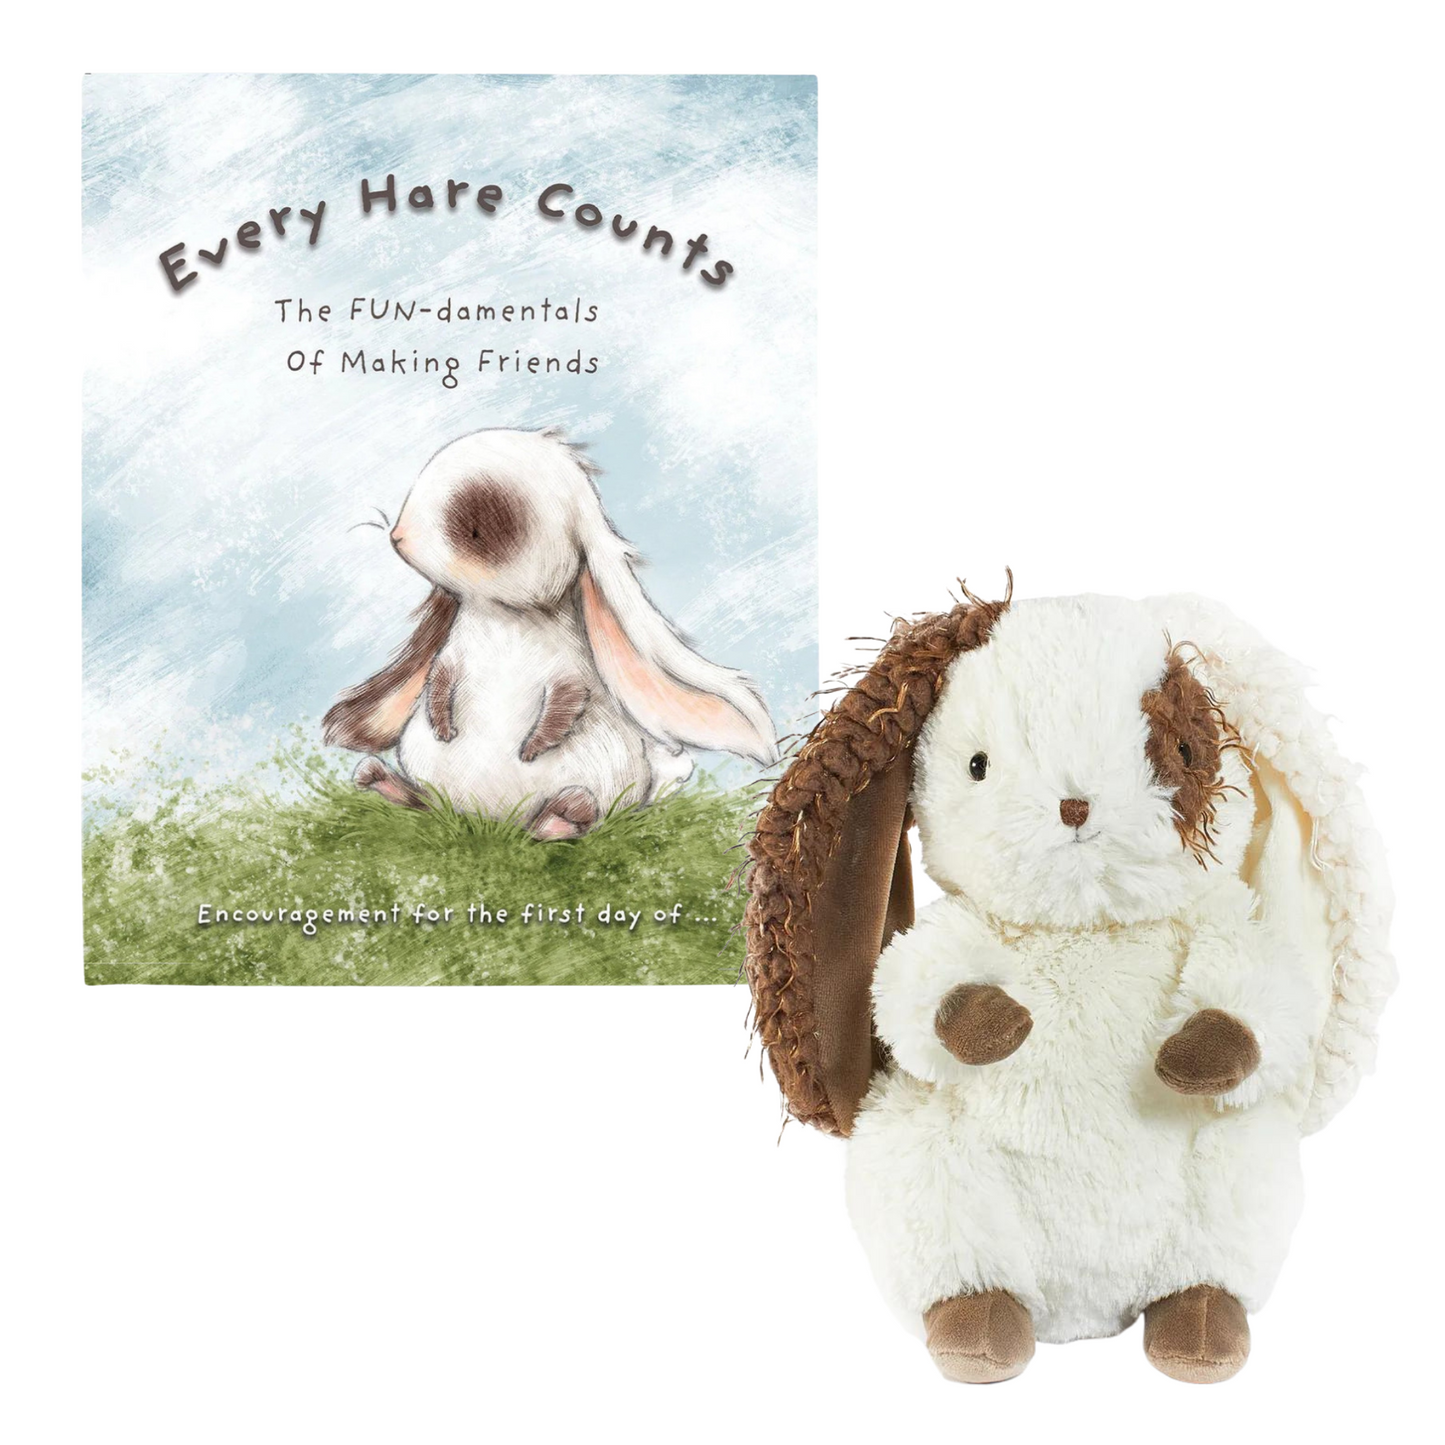 Every Hare Counts Book and Herbie Hare Soft Toy